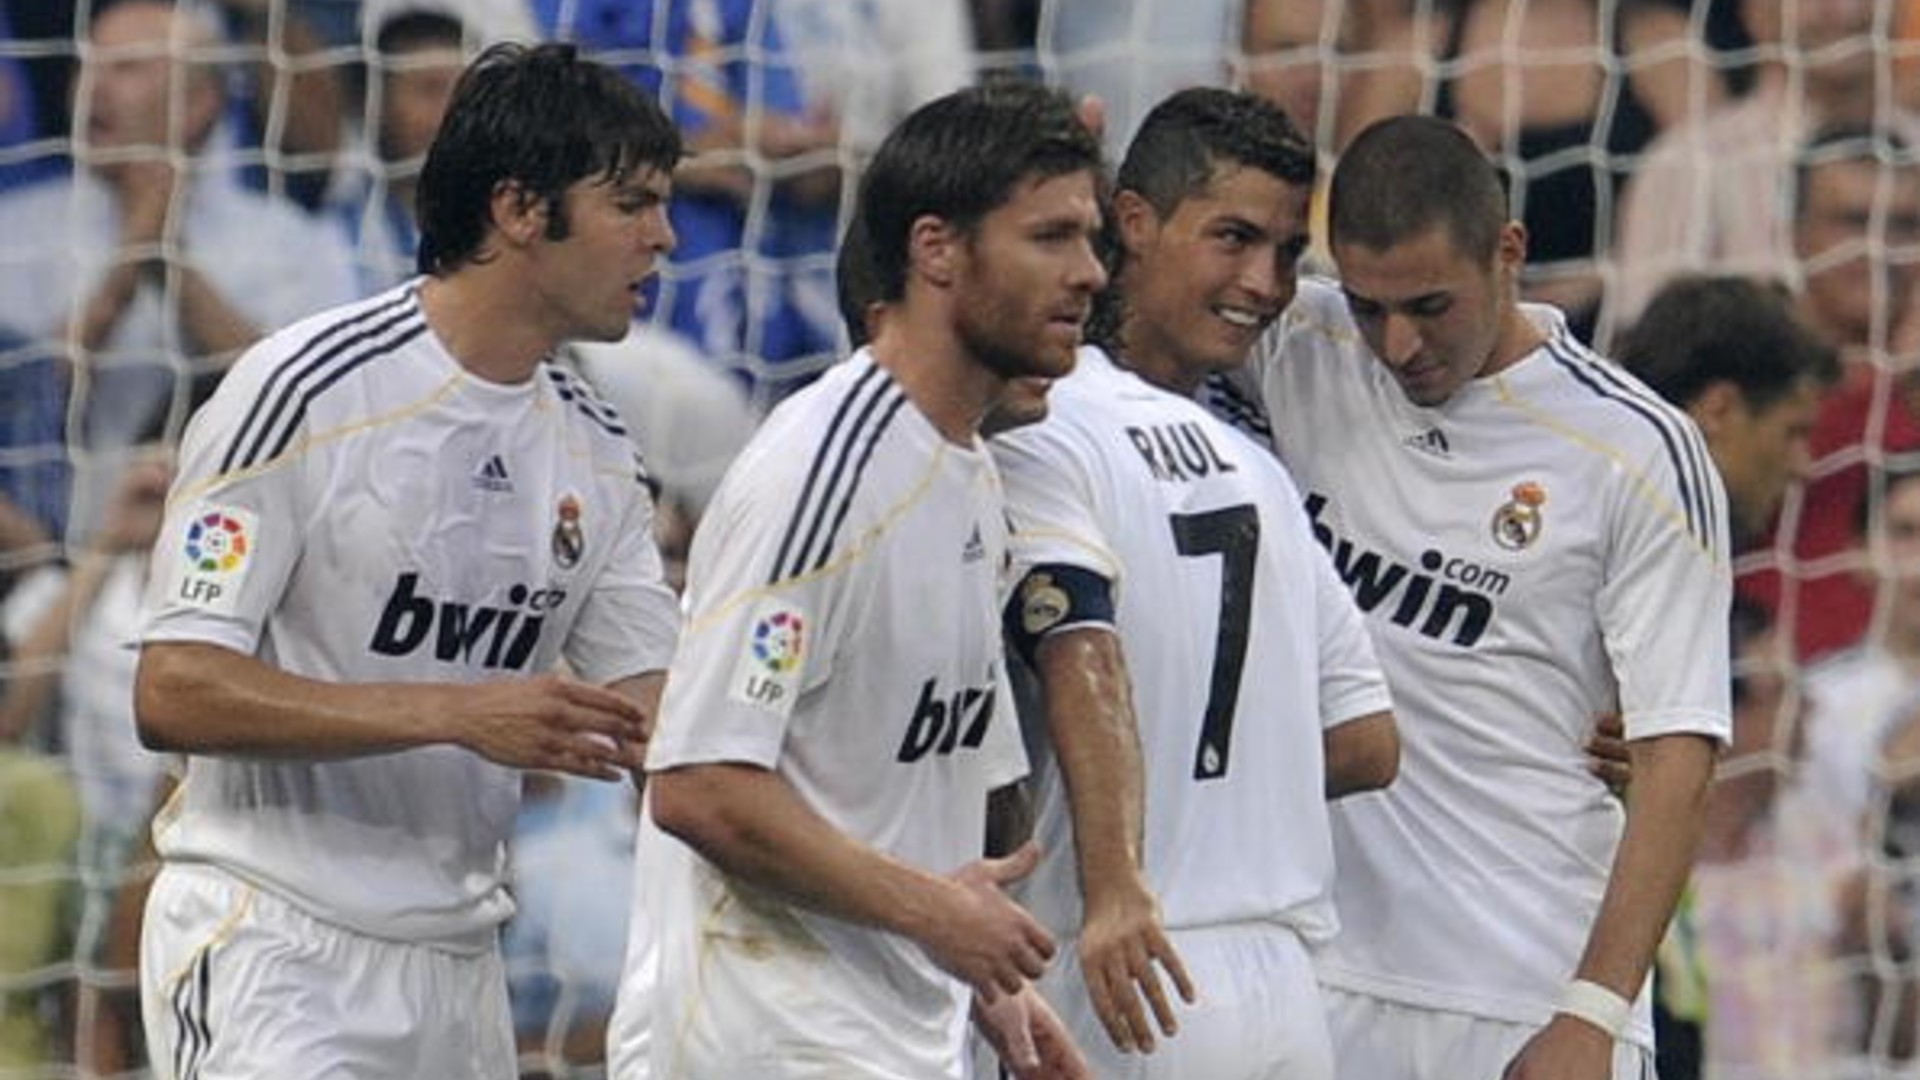 Cristiano Ronaldo's dream debut for Real Madrid - Who were his teammates and where are they now?